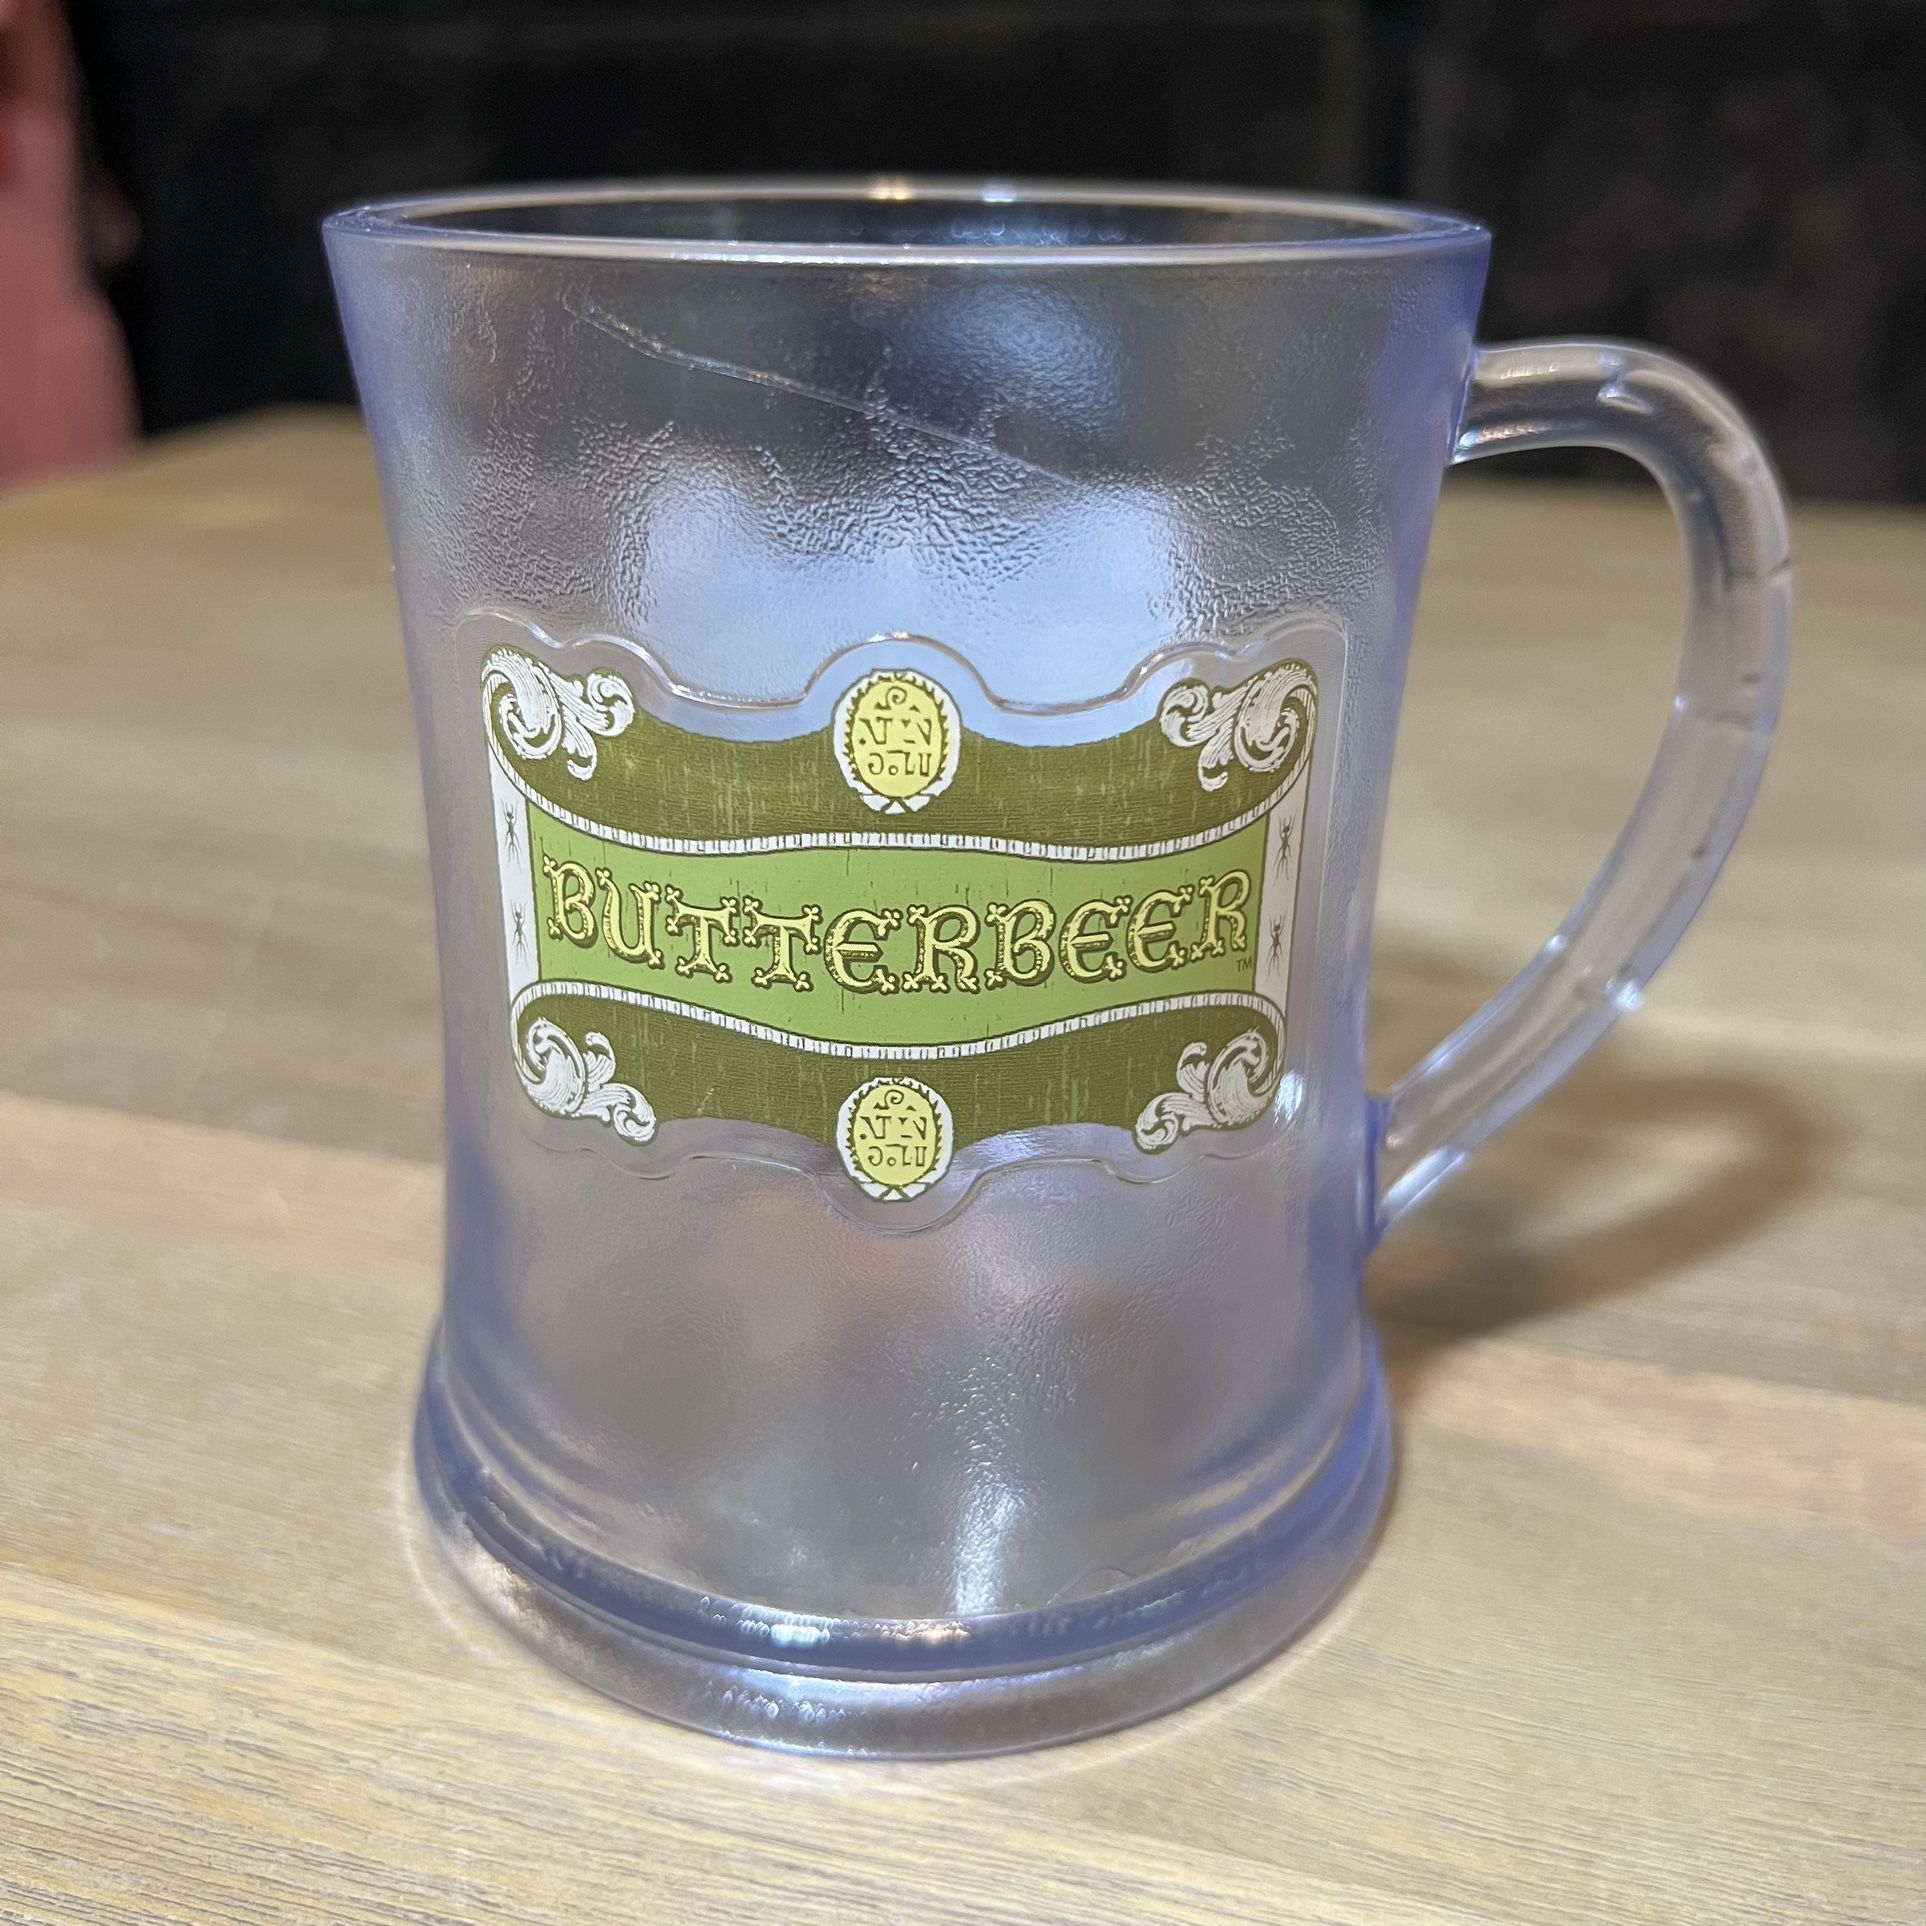 Official The Wizarding World of Harry Potter Butterbeer Mug Plastic Cup Universal Studios Orlando